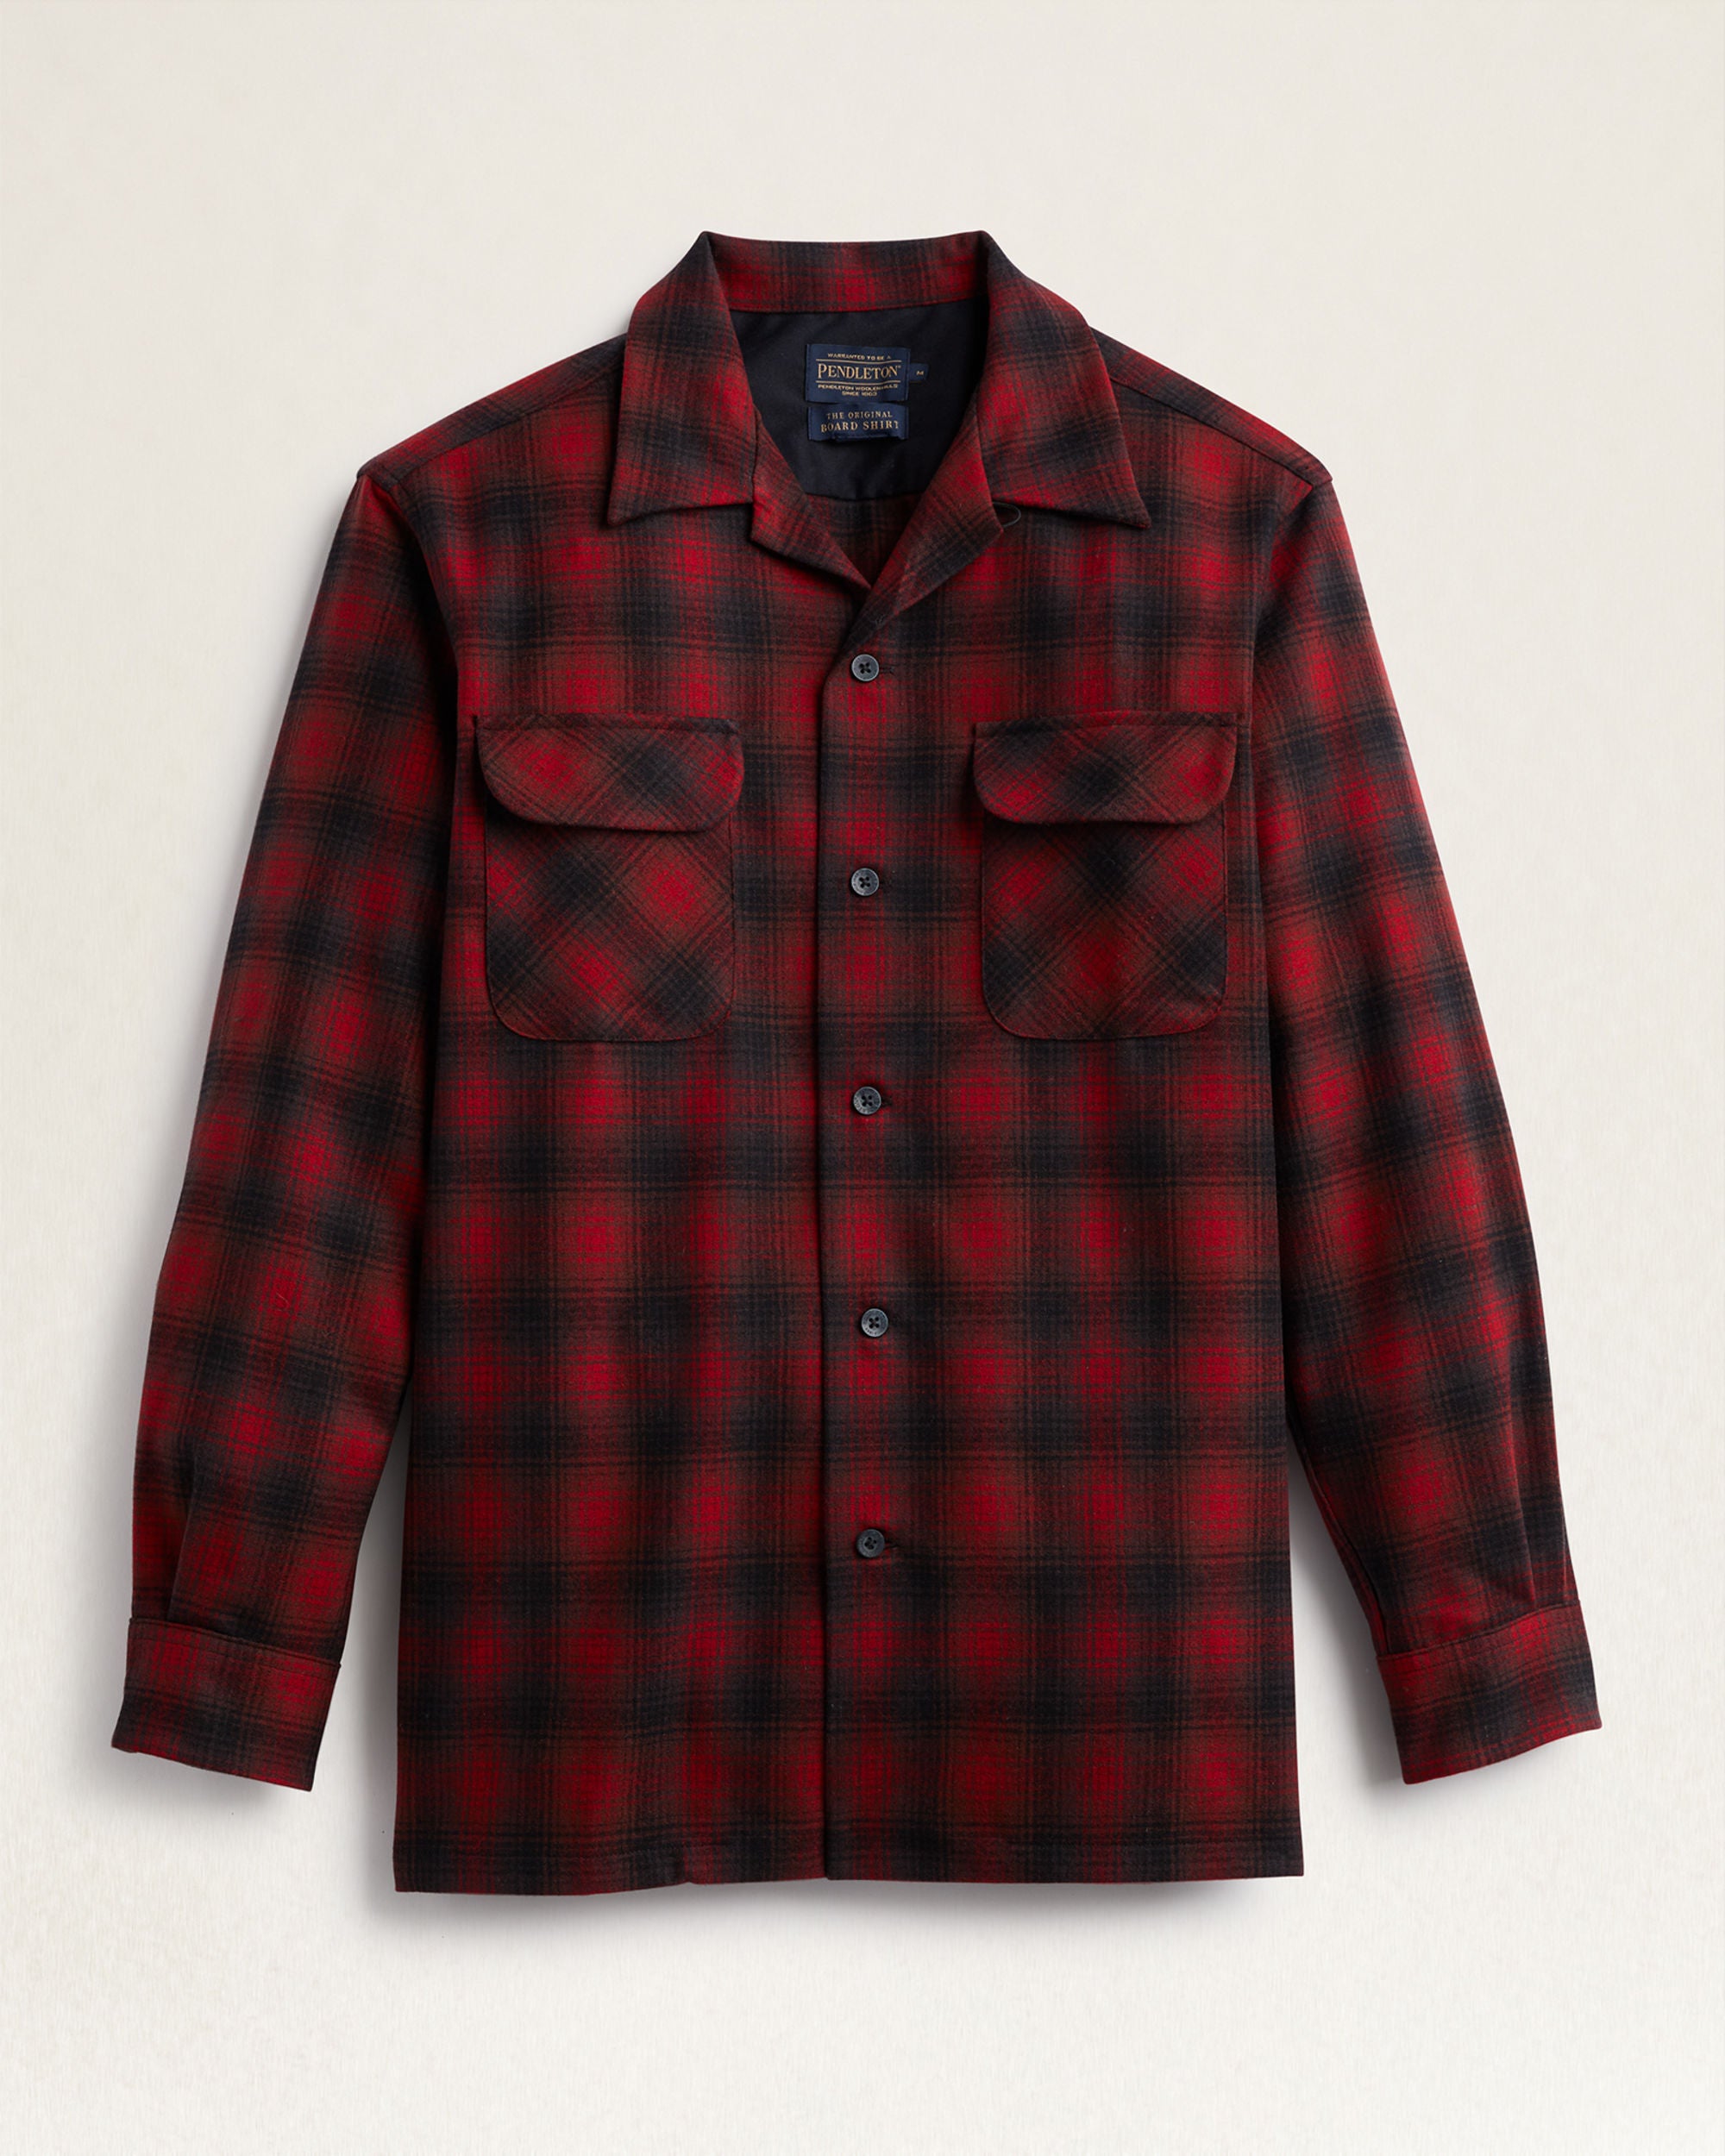 Pendleton 32594 Red Ombre